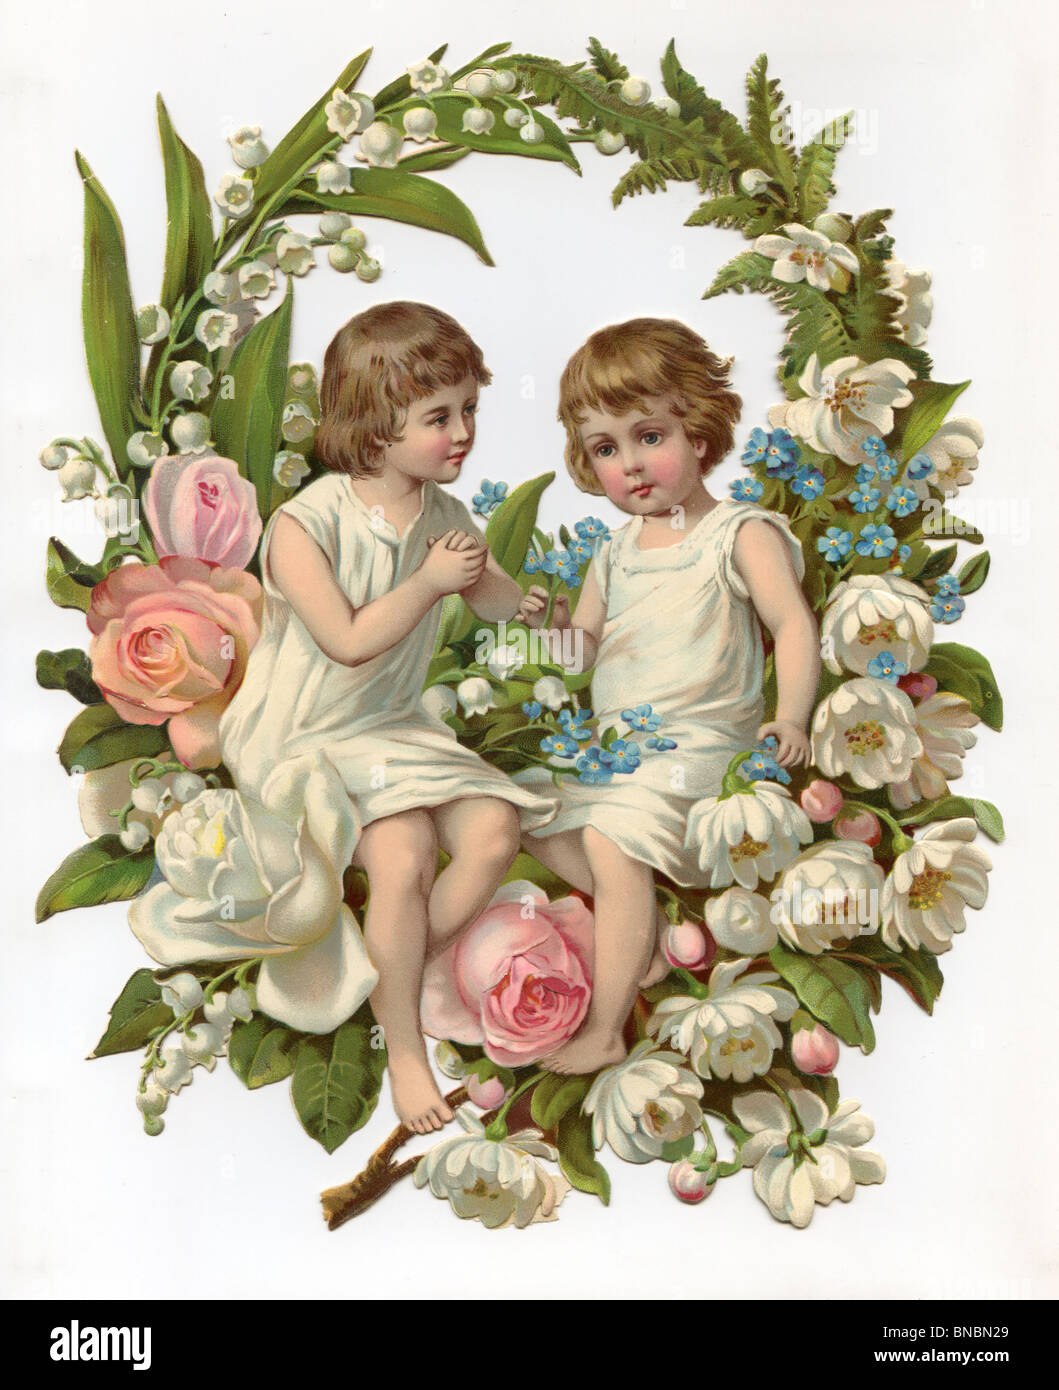 Children sitting on a display of Lily of the Valley, Roses, Forget-Me-Nots and Fern Stock Photo